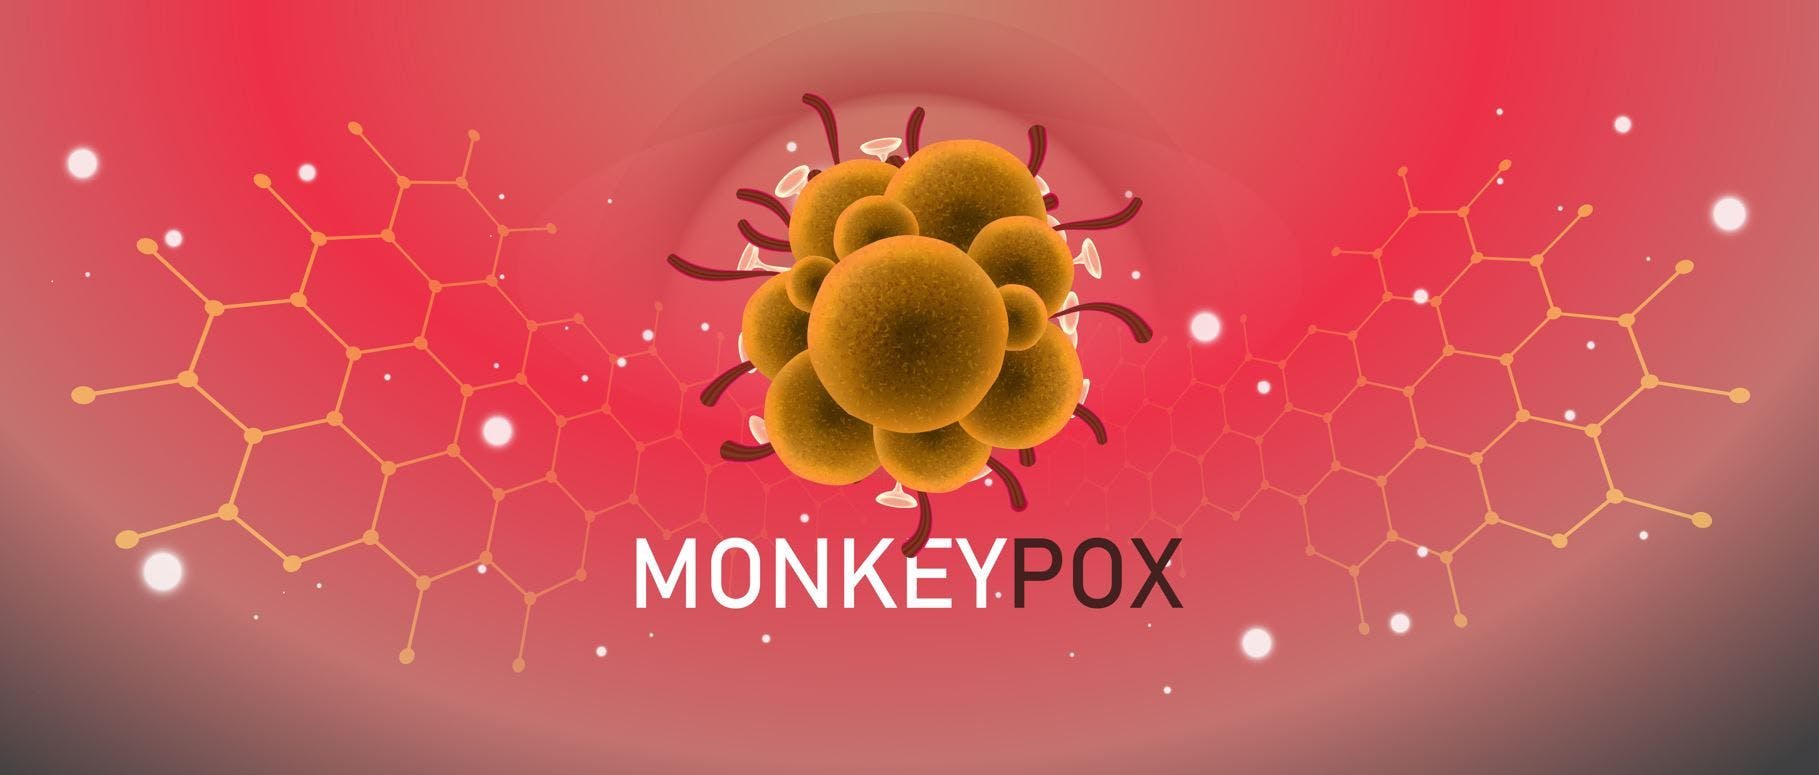 Mayo Clinic Laboratories Begin Monkeypox Testing to Help Increase Access, Availability